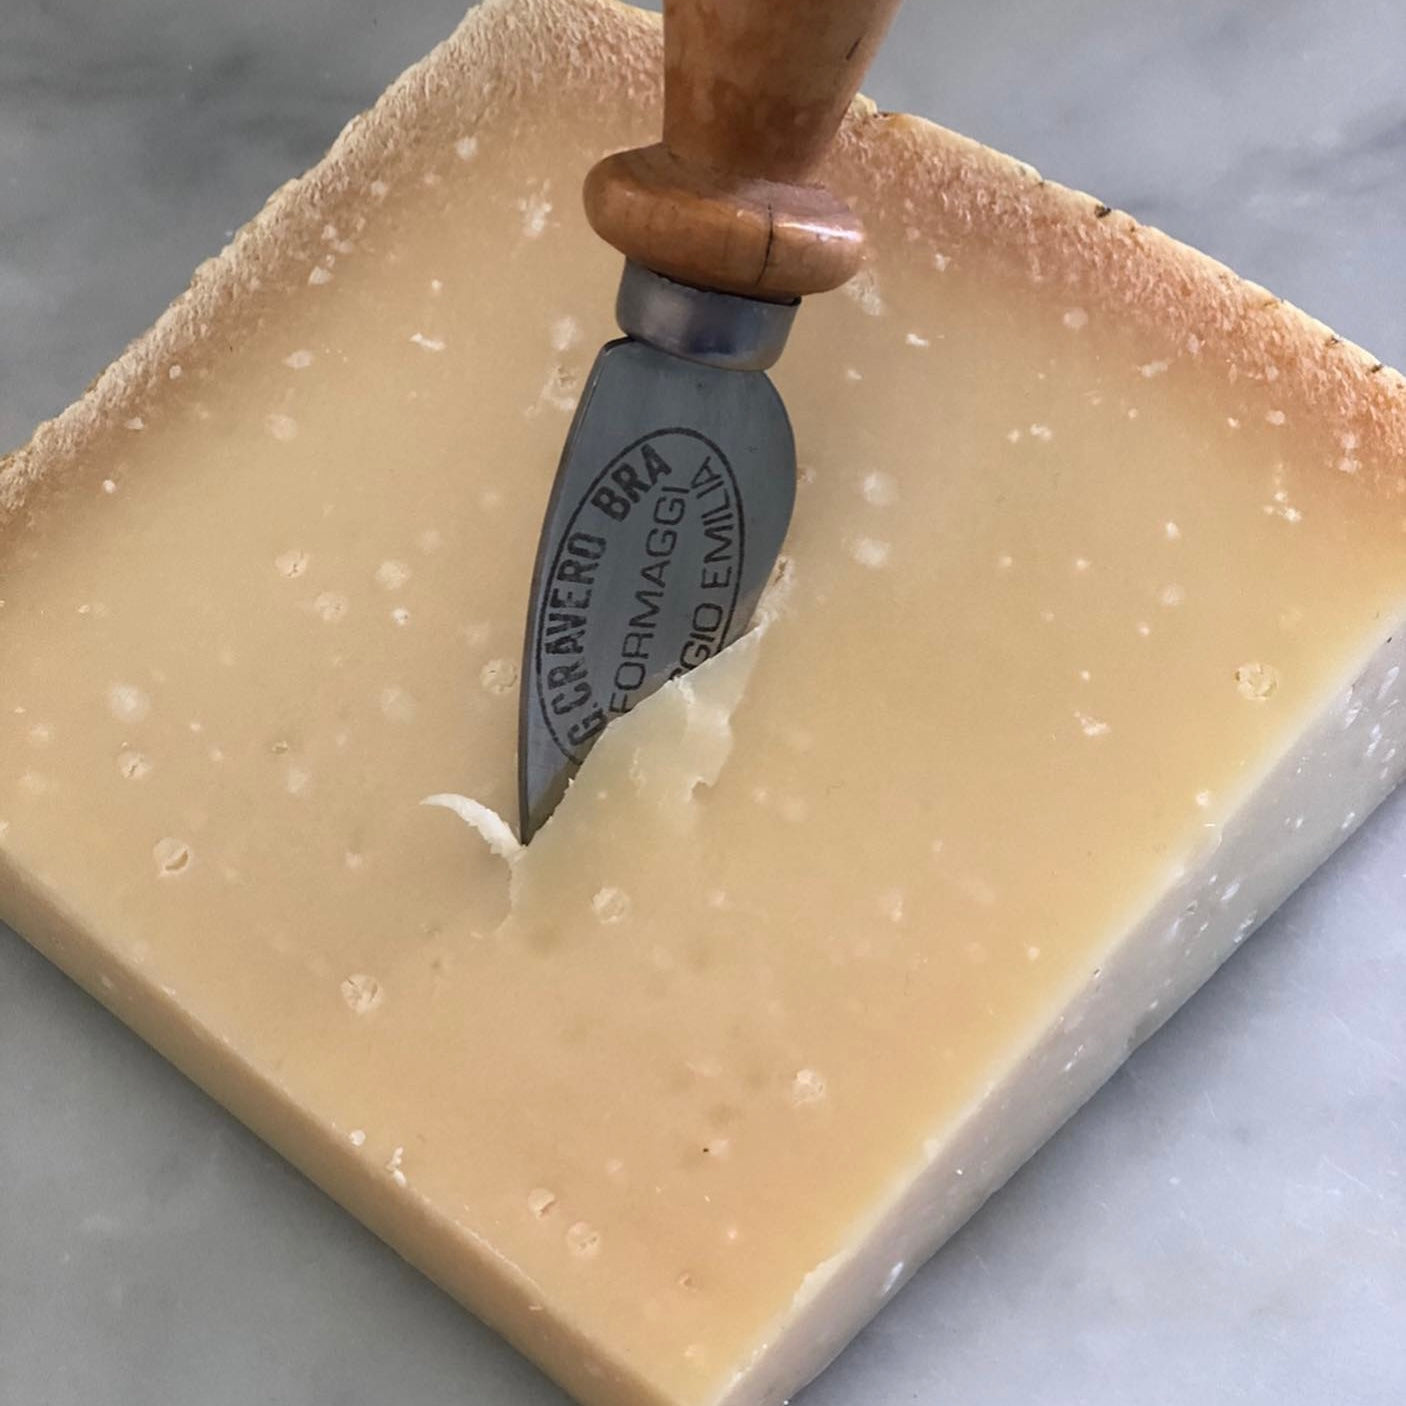 What are those crunchy bits in my cheese?